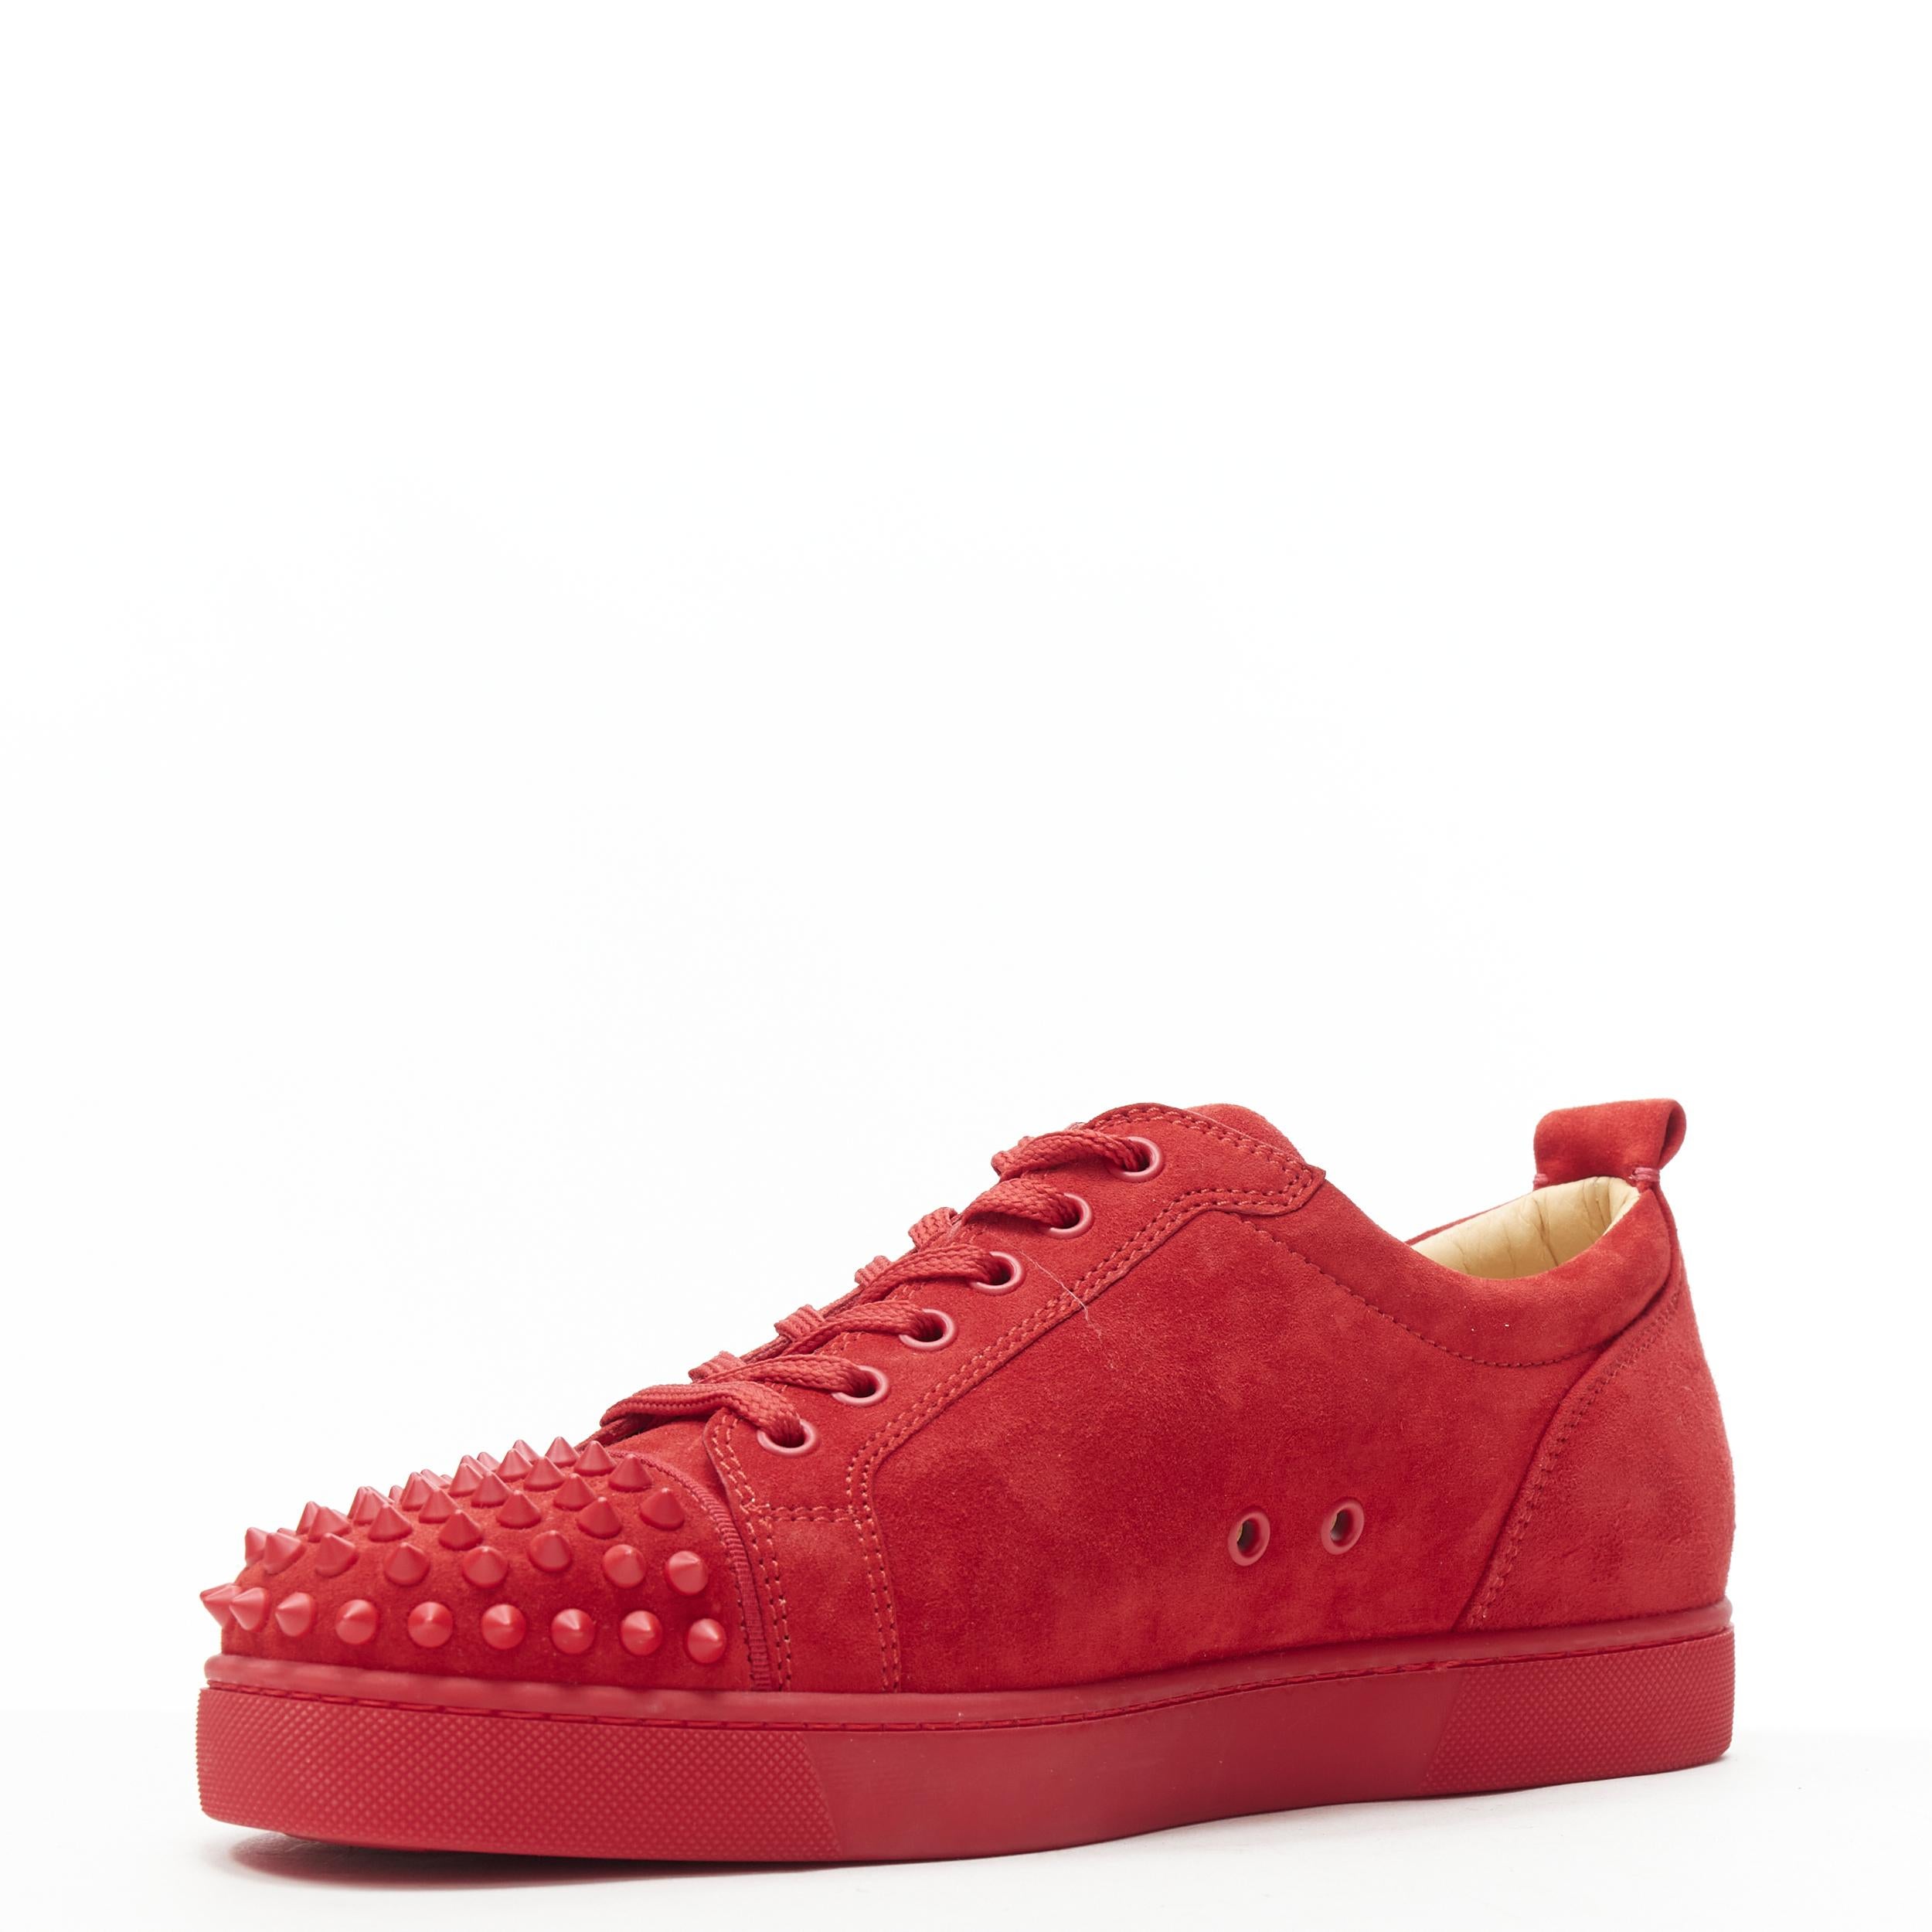 christian louboutin red spike sneakers